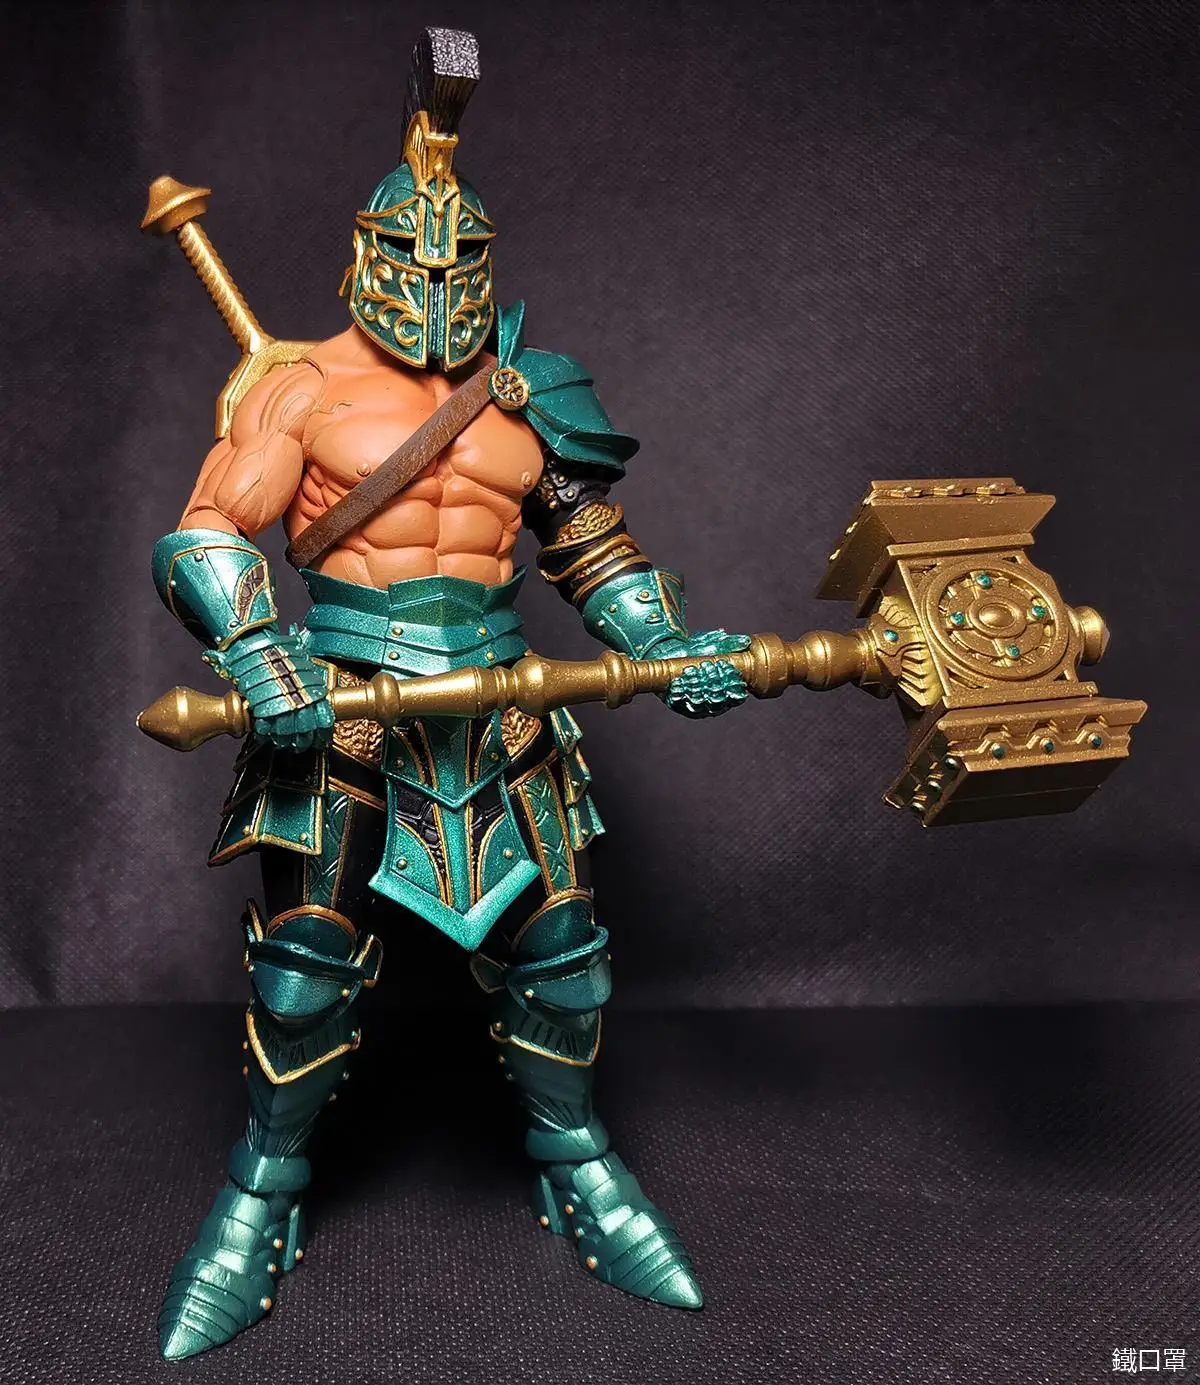 

IN STOCK Knight Mythical Legion All-Star 2.0 Destroyer Green Rome Deltigar 7 inches action figure model toy collection